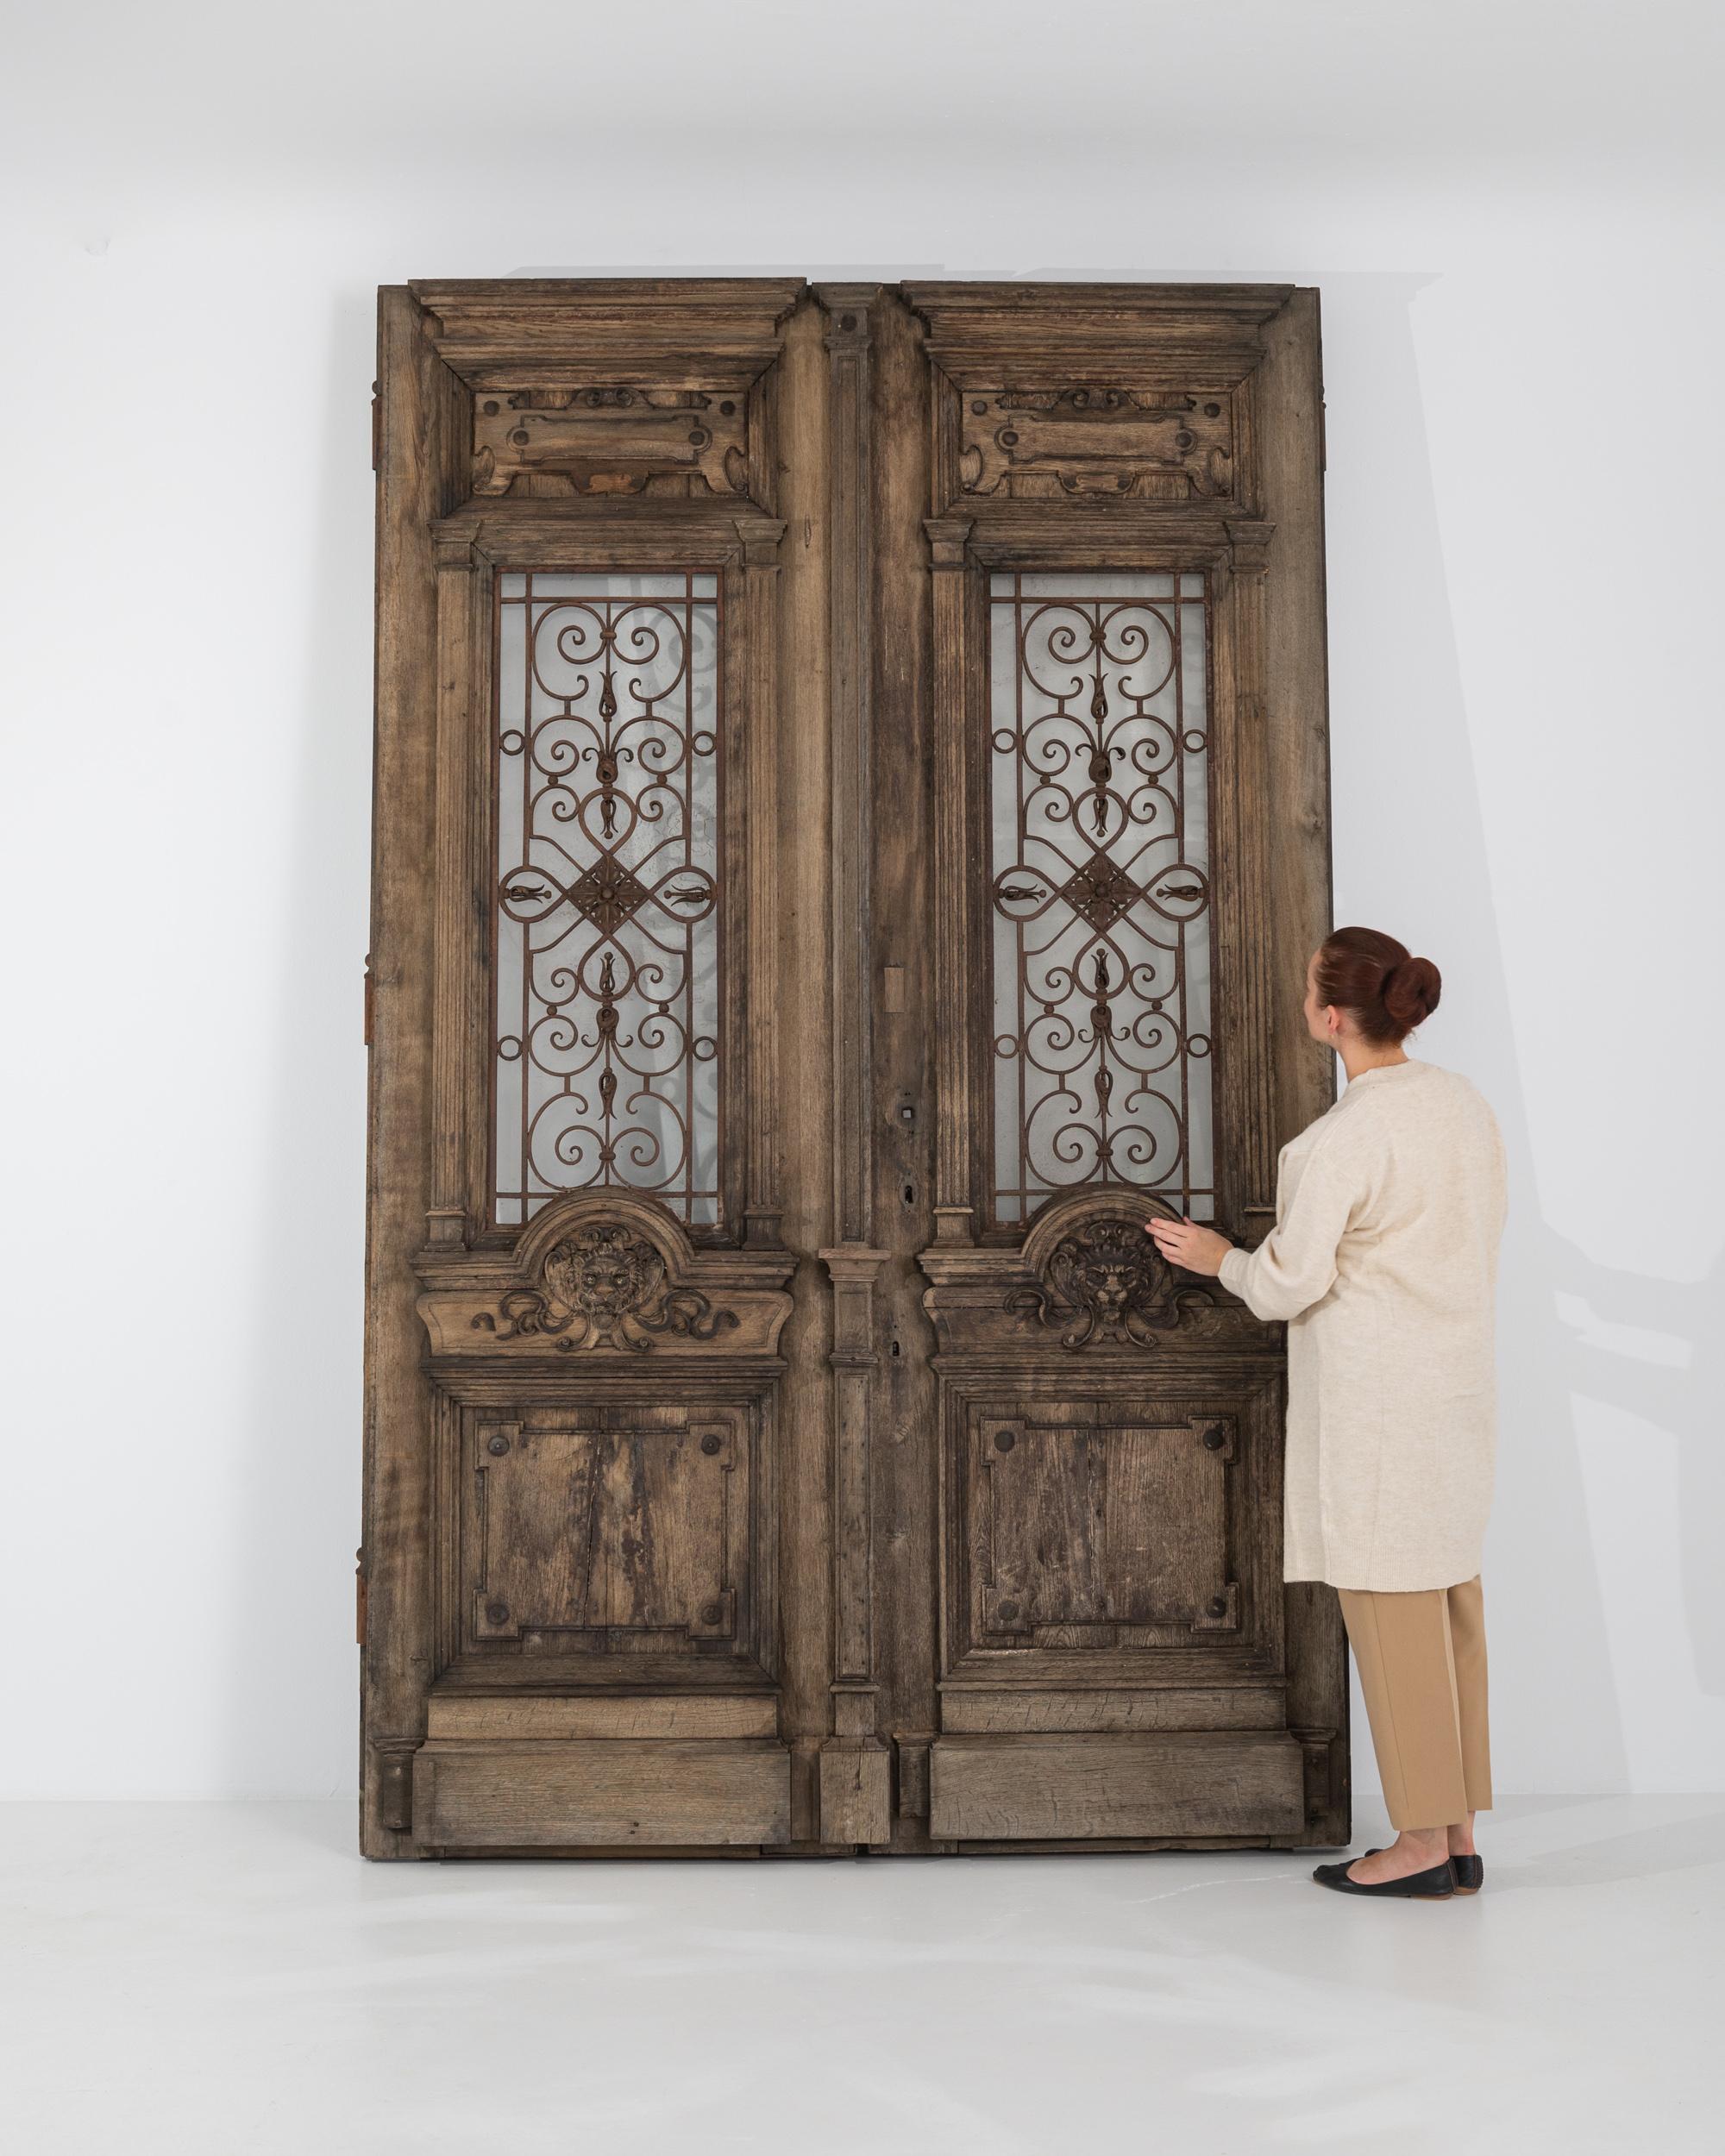 Mysterious and ornate, this magnificent pair of antique wooden doors were made to be marveled over. Built in Central Europe in the 1800s, the weathered patina of the wood creates an impression of faded grandeur, but the beautifully crafted